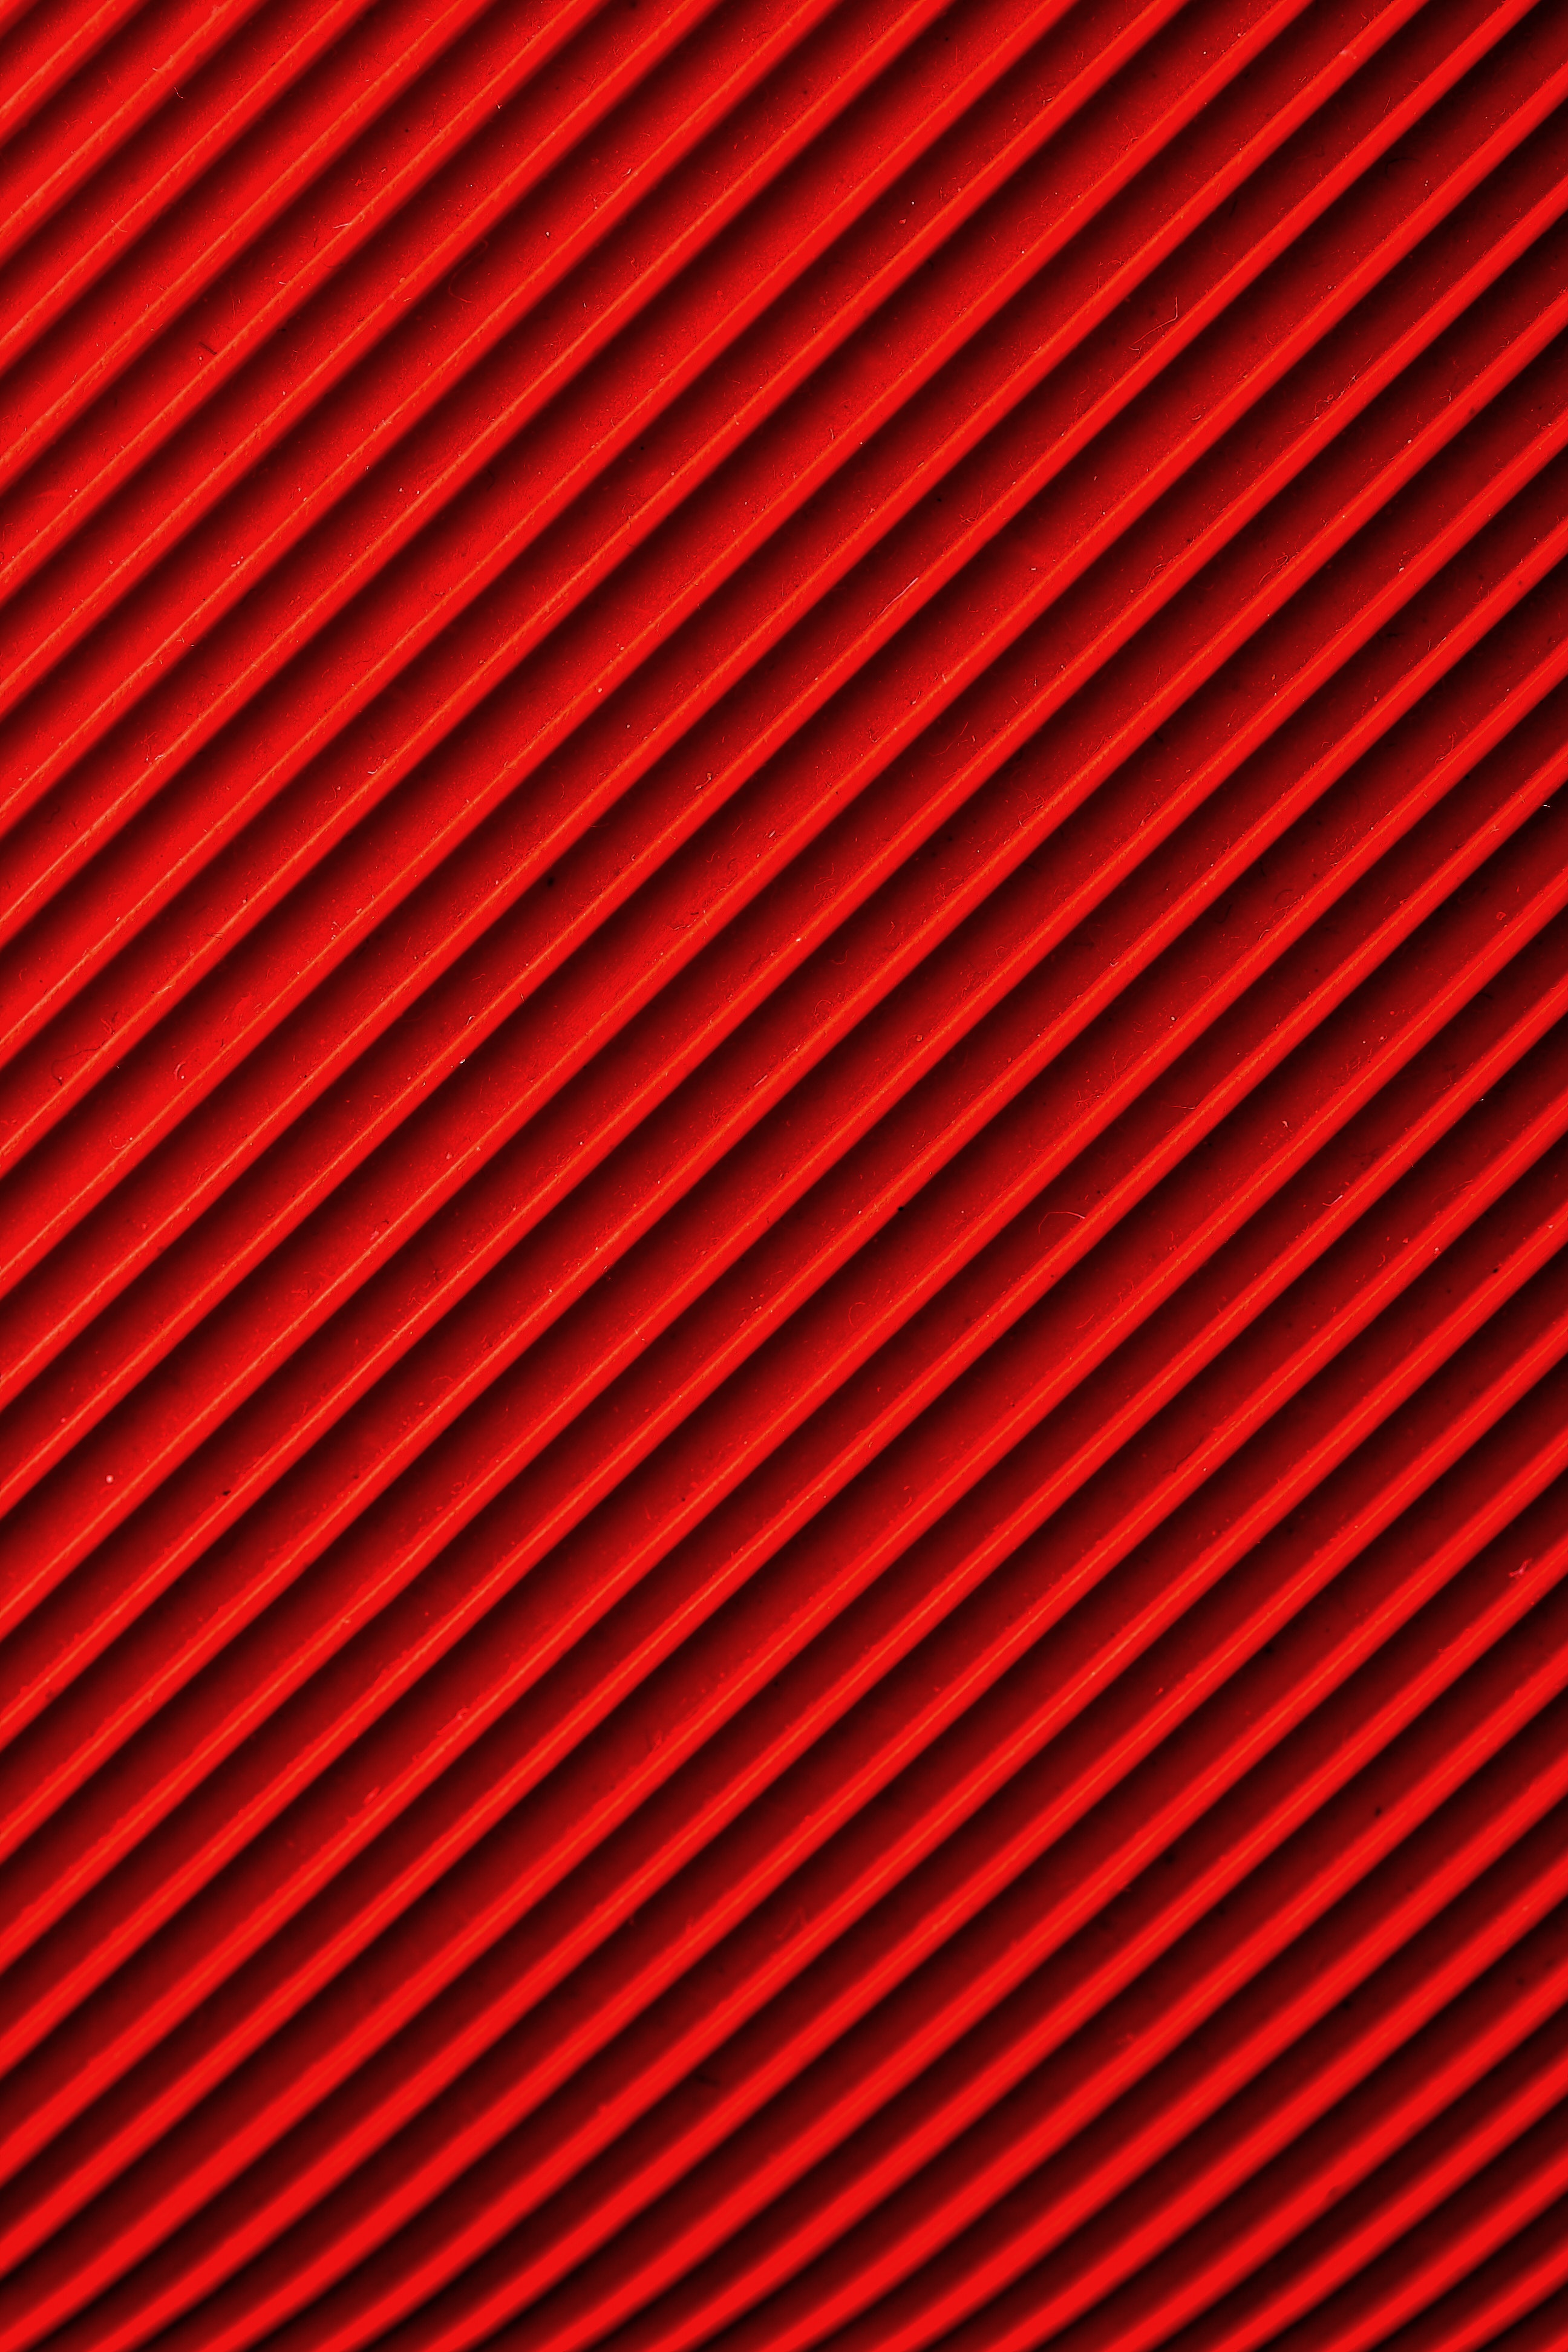 textures, obliquely, red, texture, lines, surface cellphone